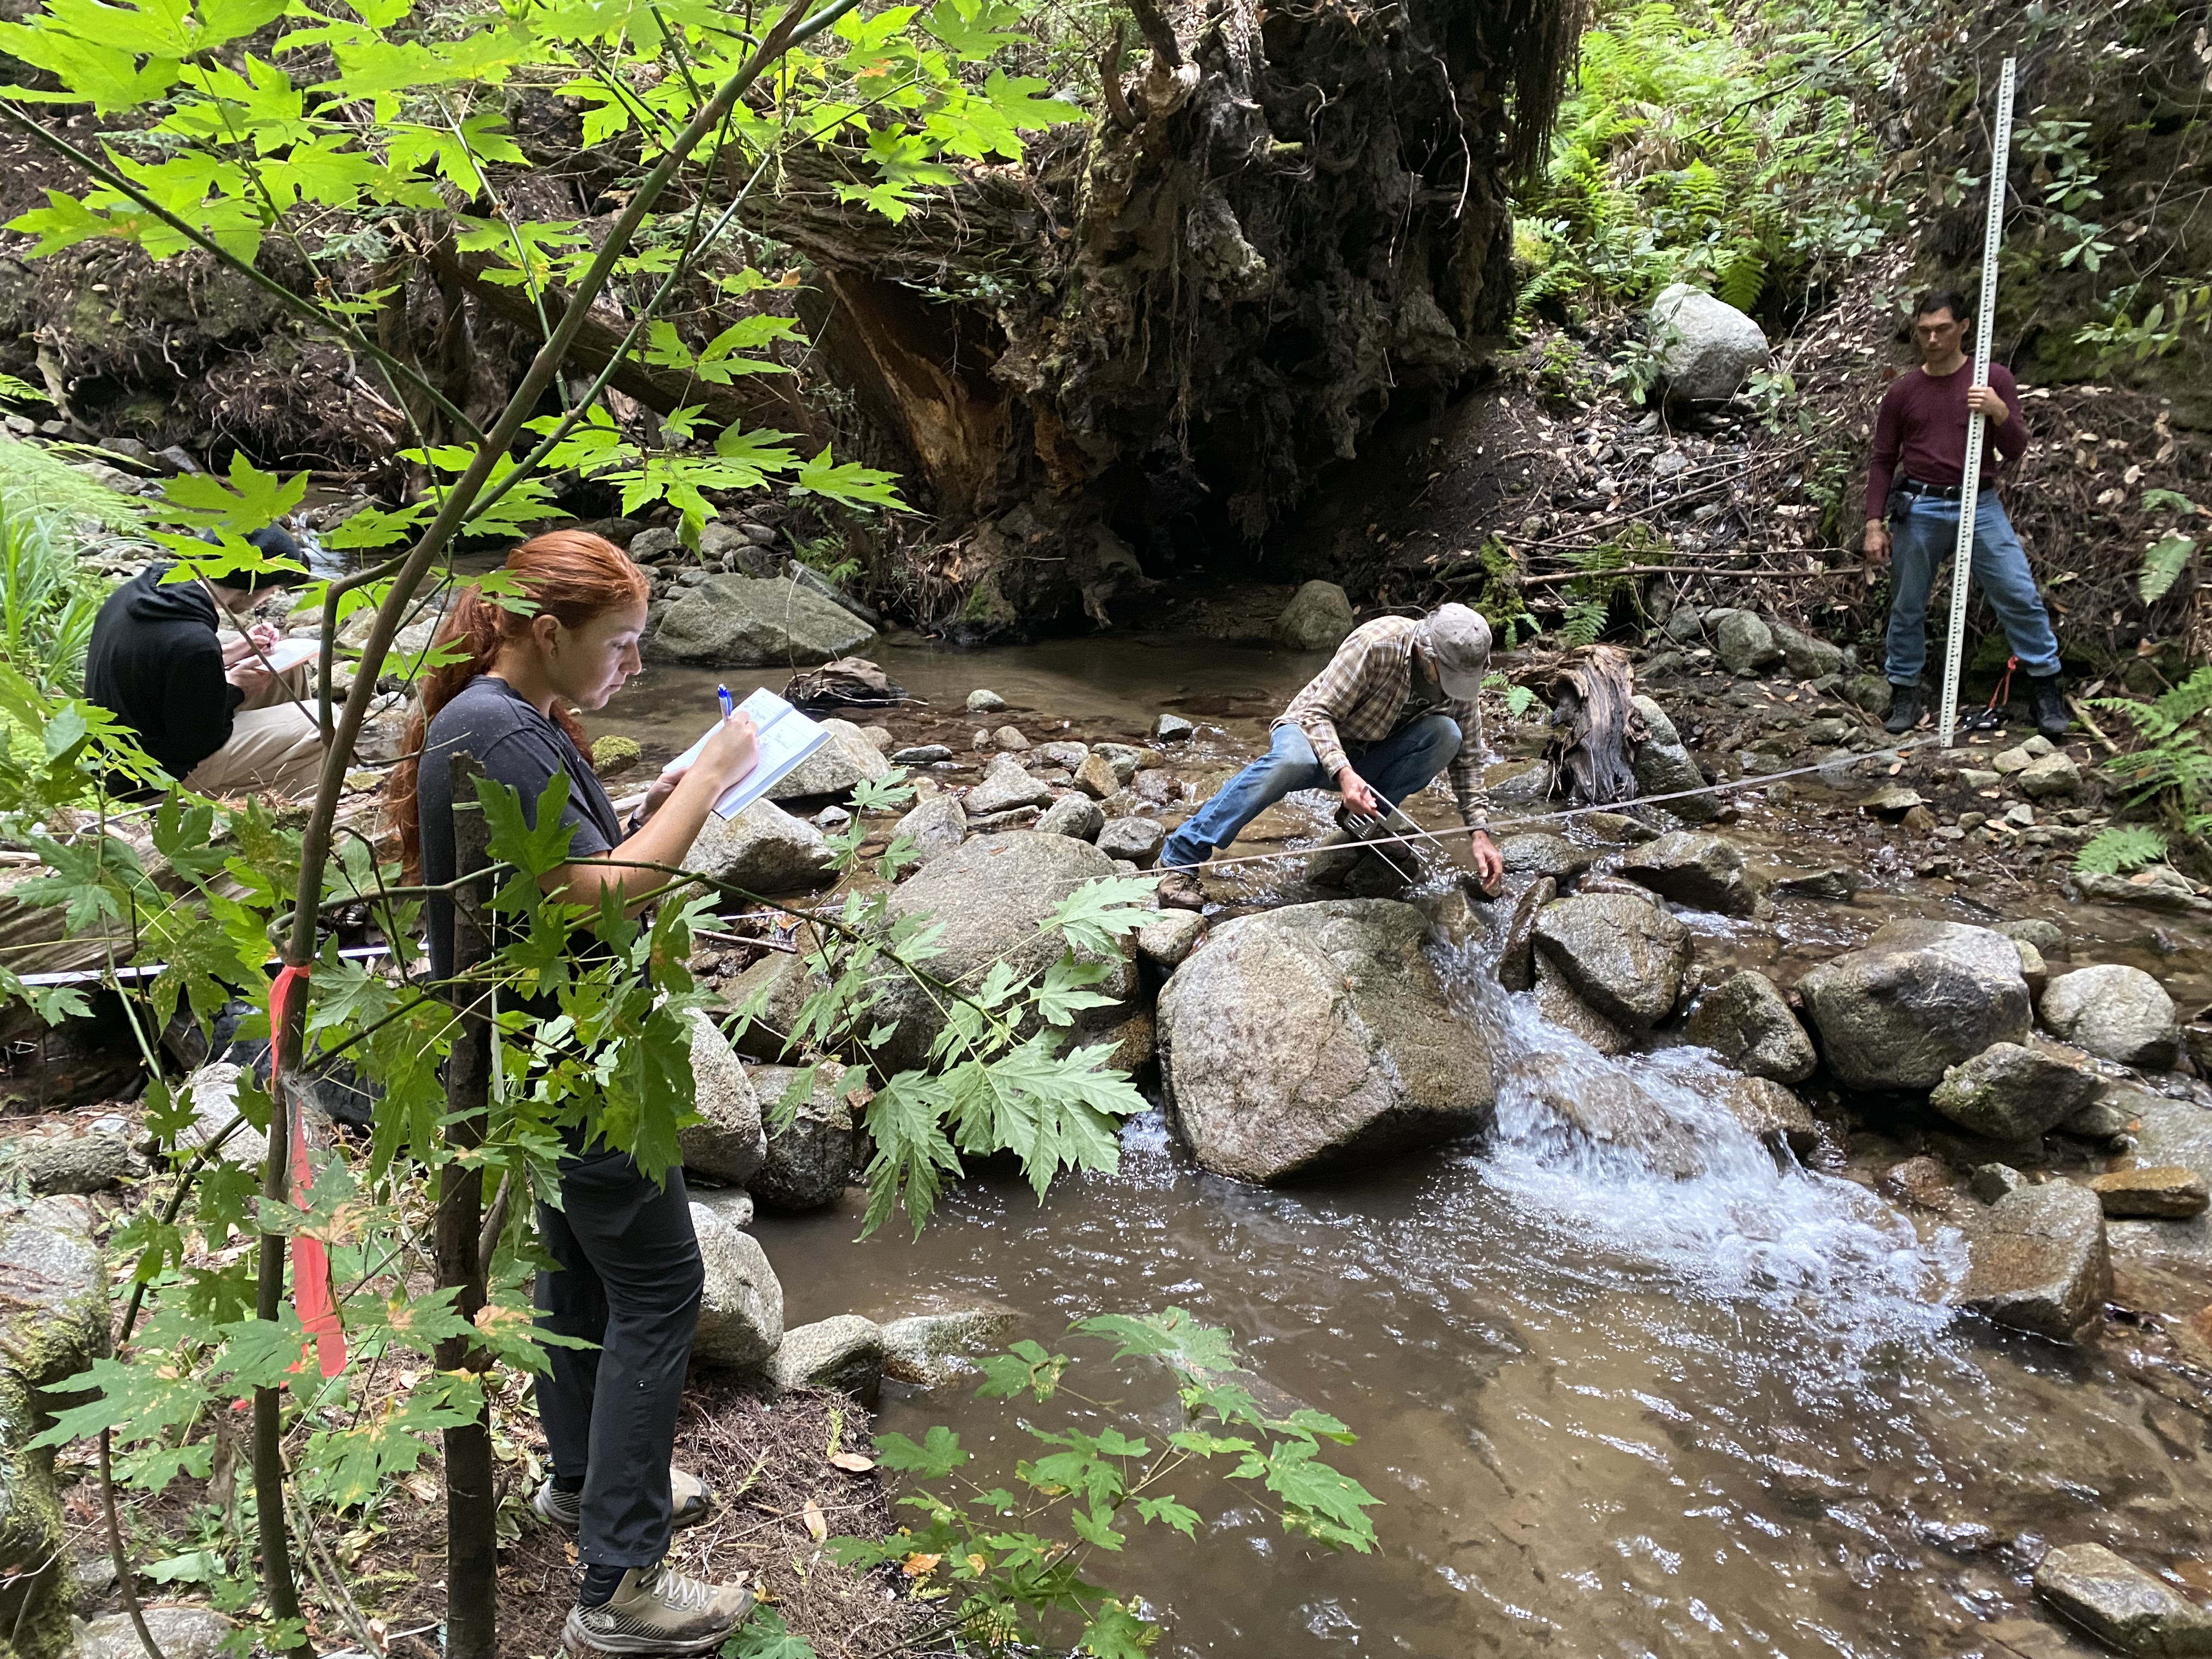 Four scientists are working along a creek.  Two scientists are taking measurements of rocks, and two are recording data.